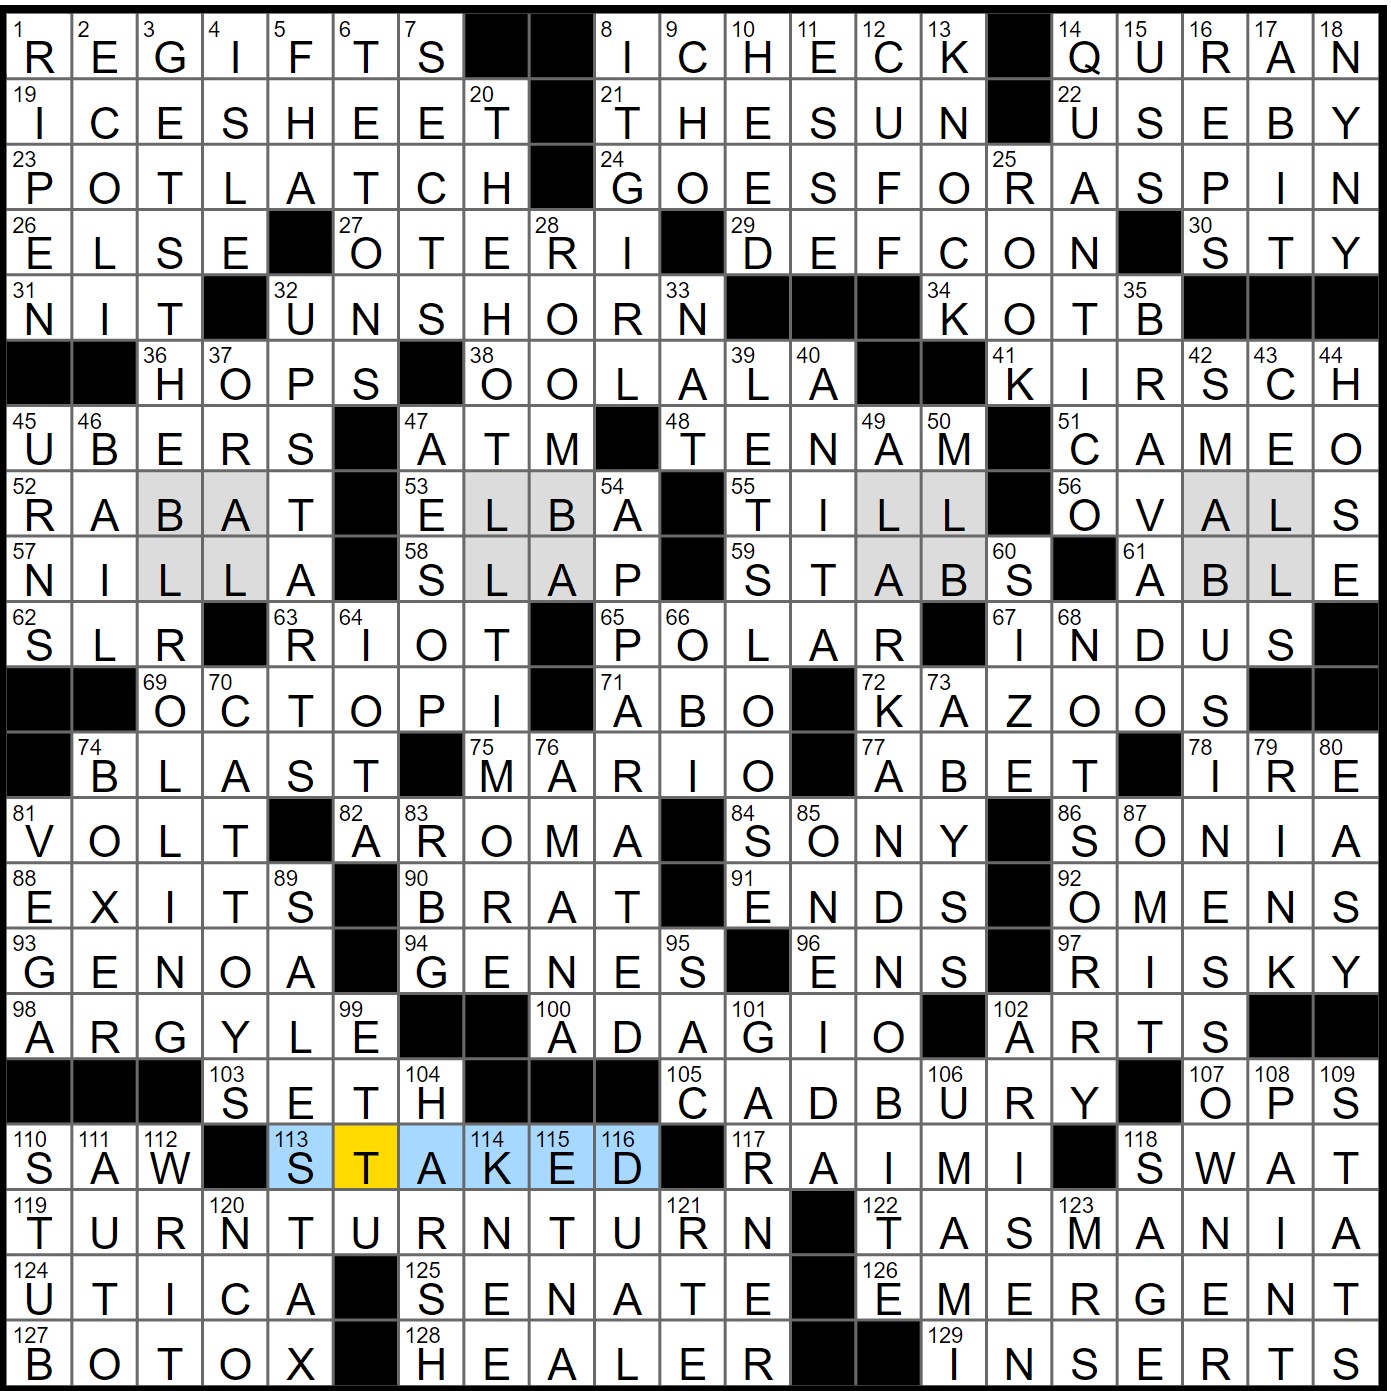 Rex Parker Does The Nyt Crossword Puzzle Leave Off As The